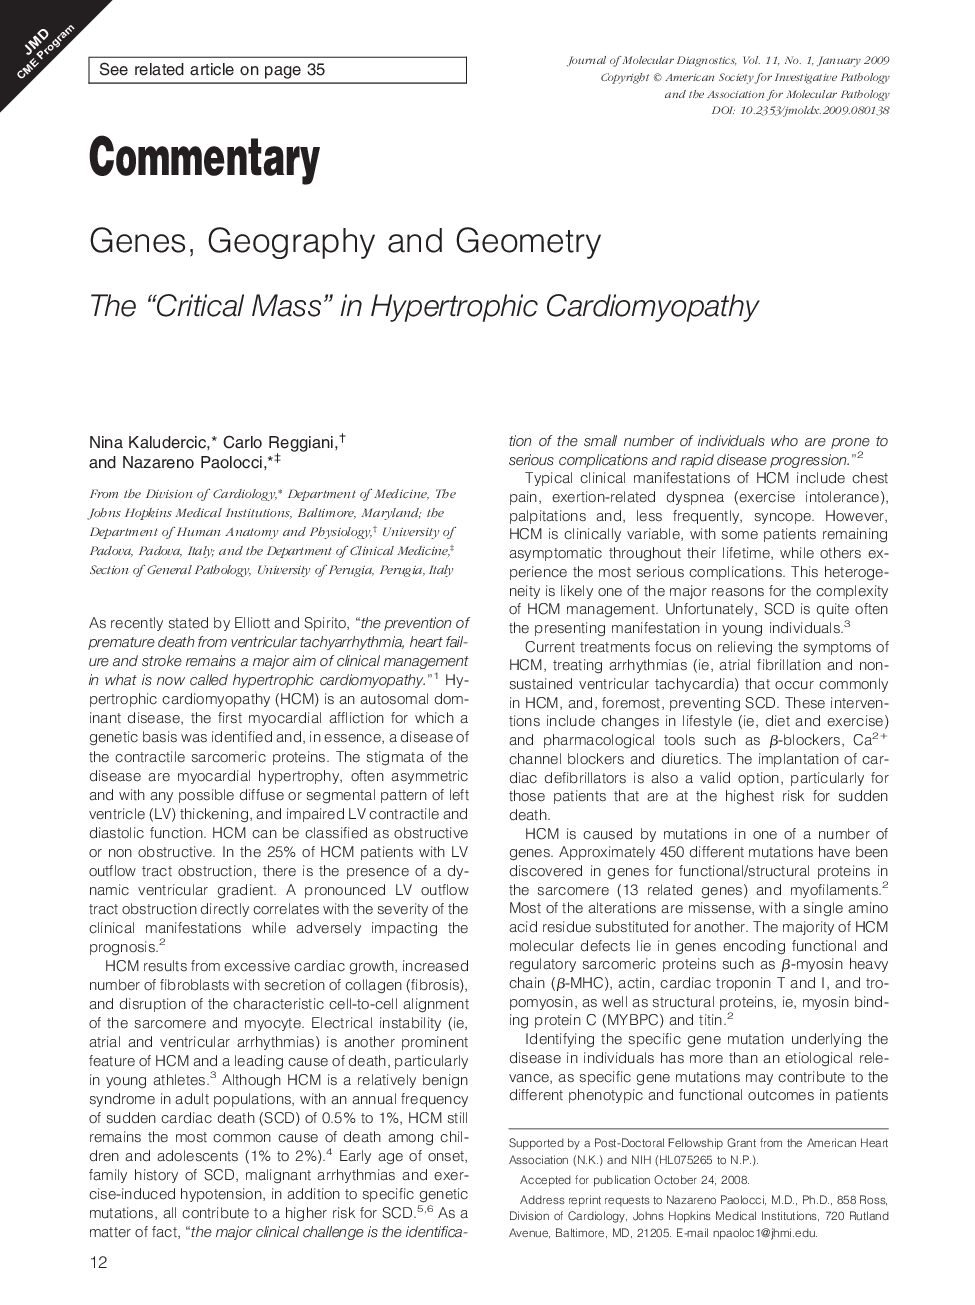 Genes, Geography and Geometry : The “Critical Mass” in Hypertrophic Cardiomyopathy